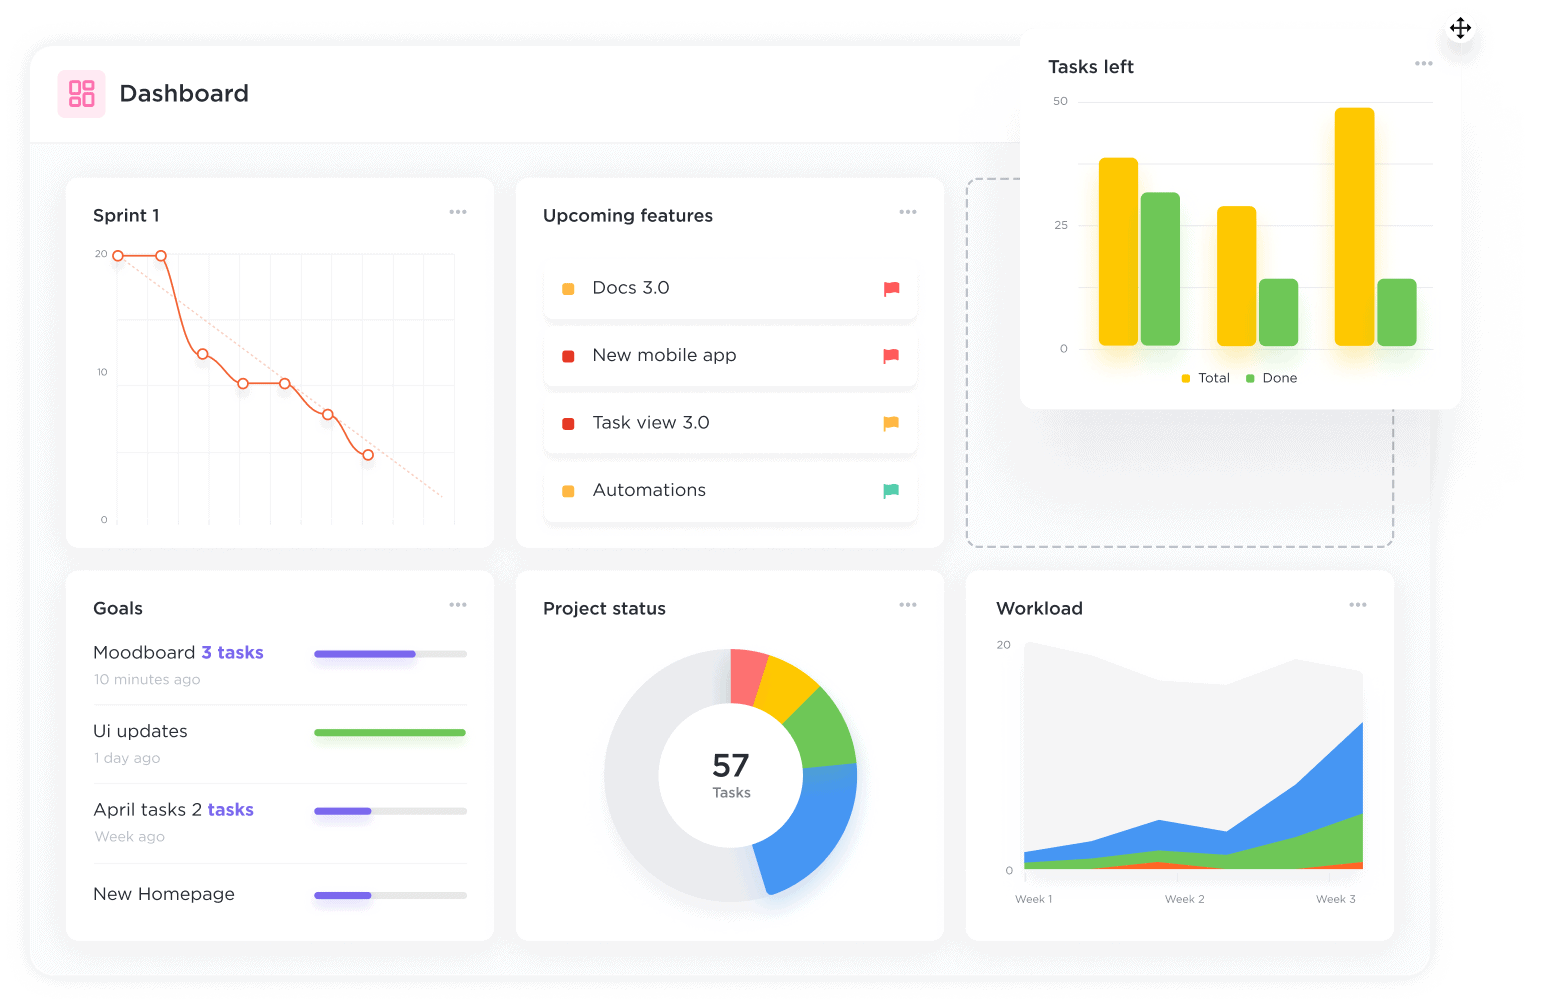 Meet growth targets with Dashboards.